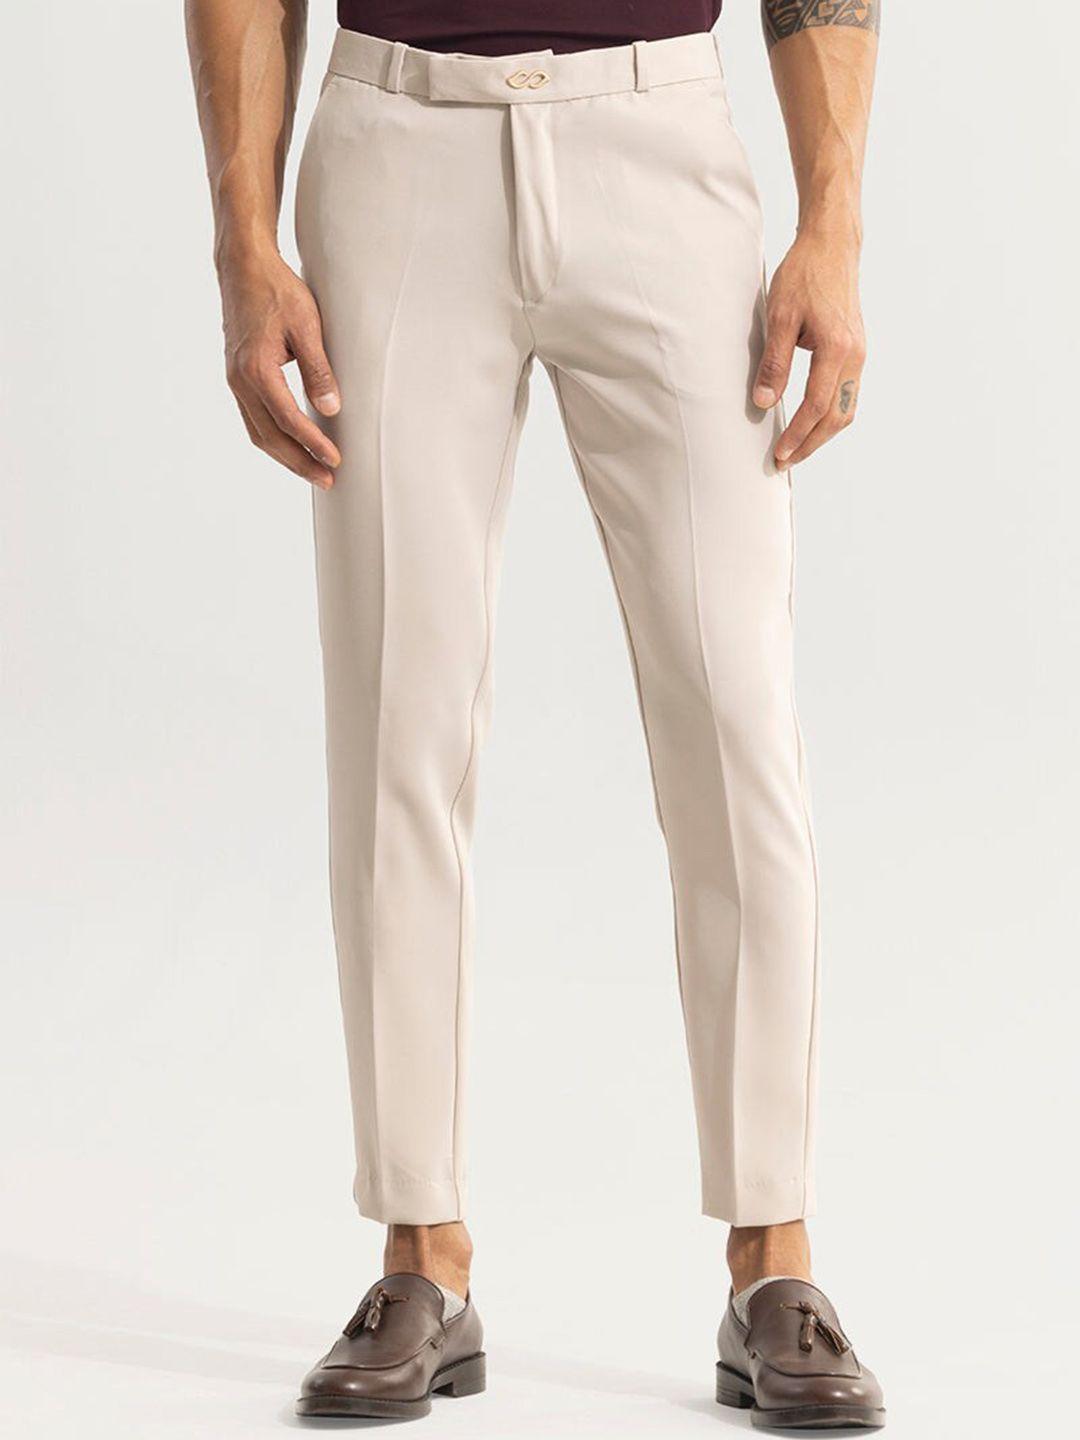 snitch-men-mid-rise-smart-slim-fit-chinos-trousers